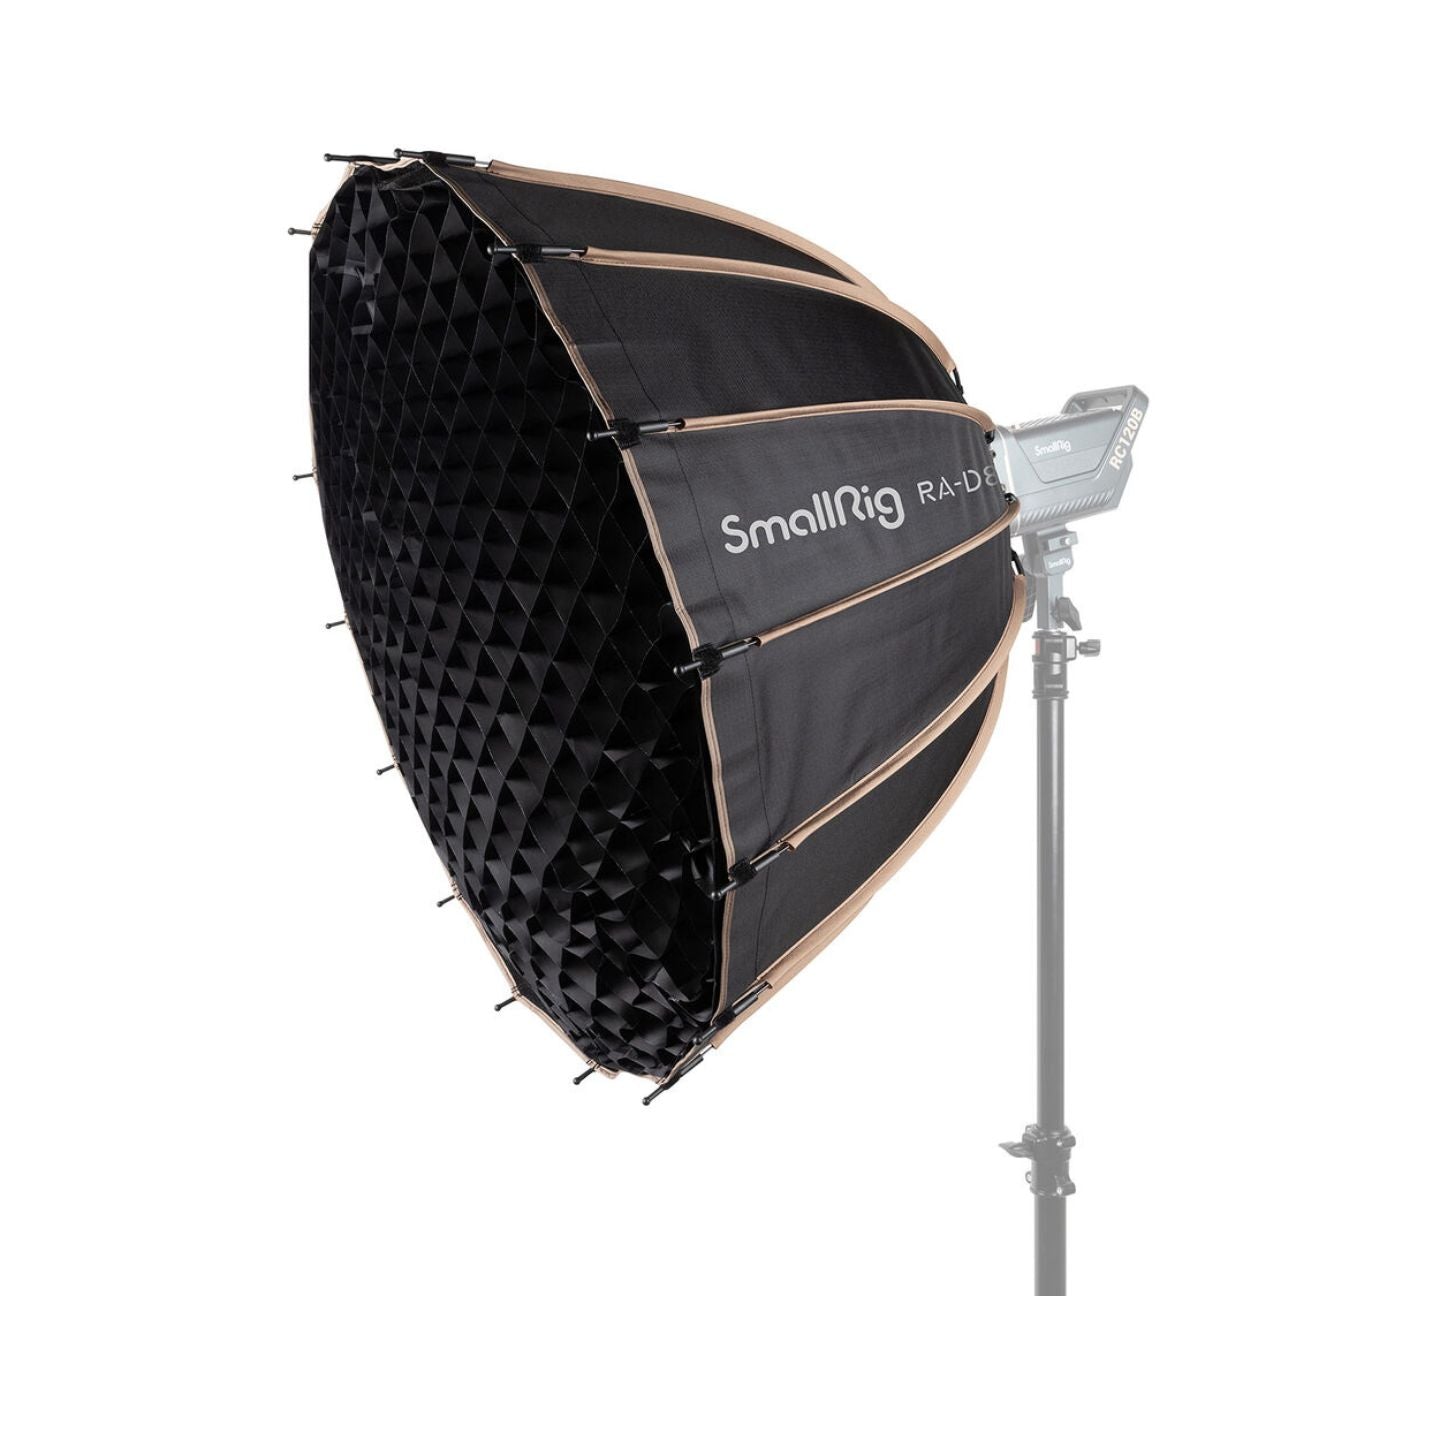 SmallRig RA-D 21.6" / 33.1" Quick Release Parabolic Softbox with Waterproof Exterior, Honeycomb Grid, Carry Bag for Studio Recording, Live Streaming, Photography | RA-D55, RA-D85